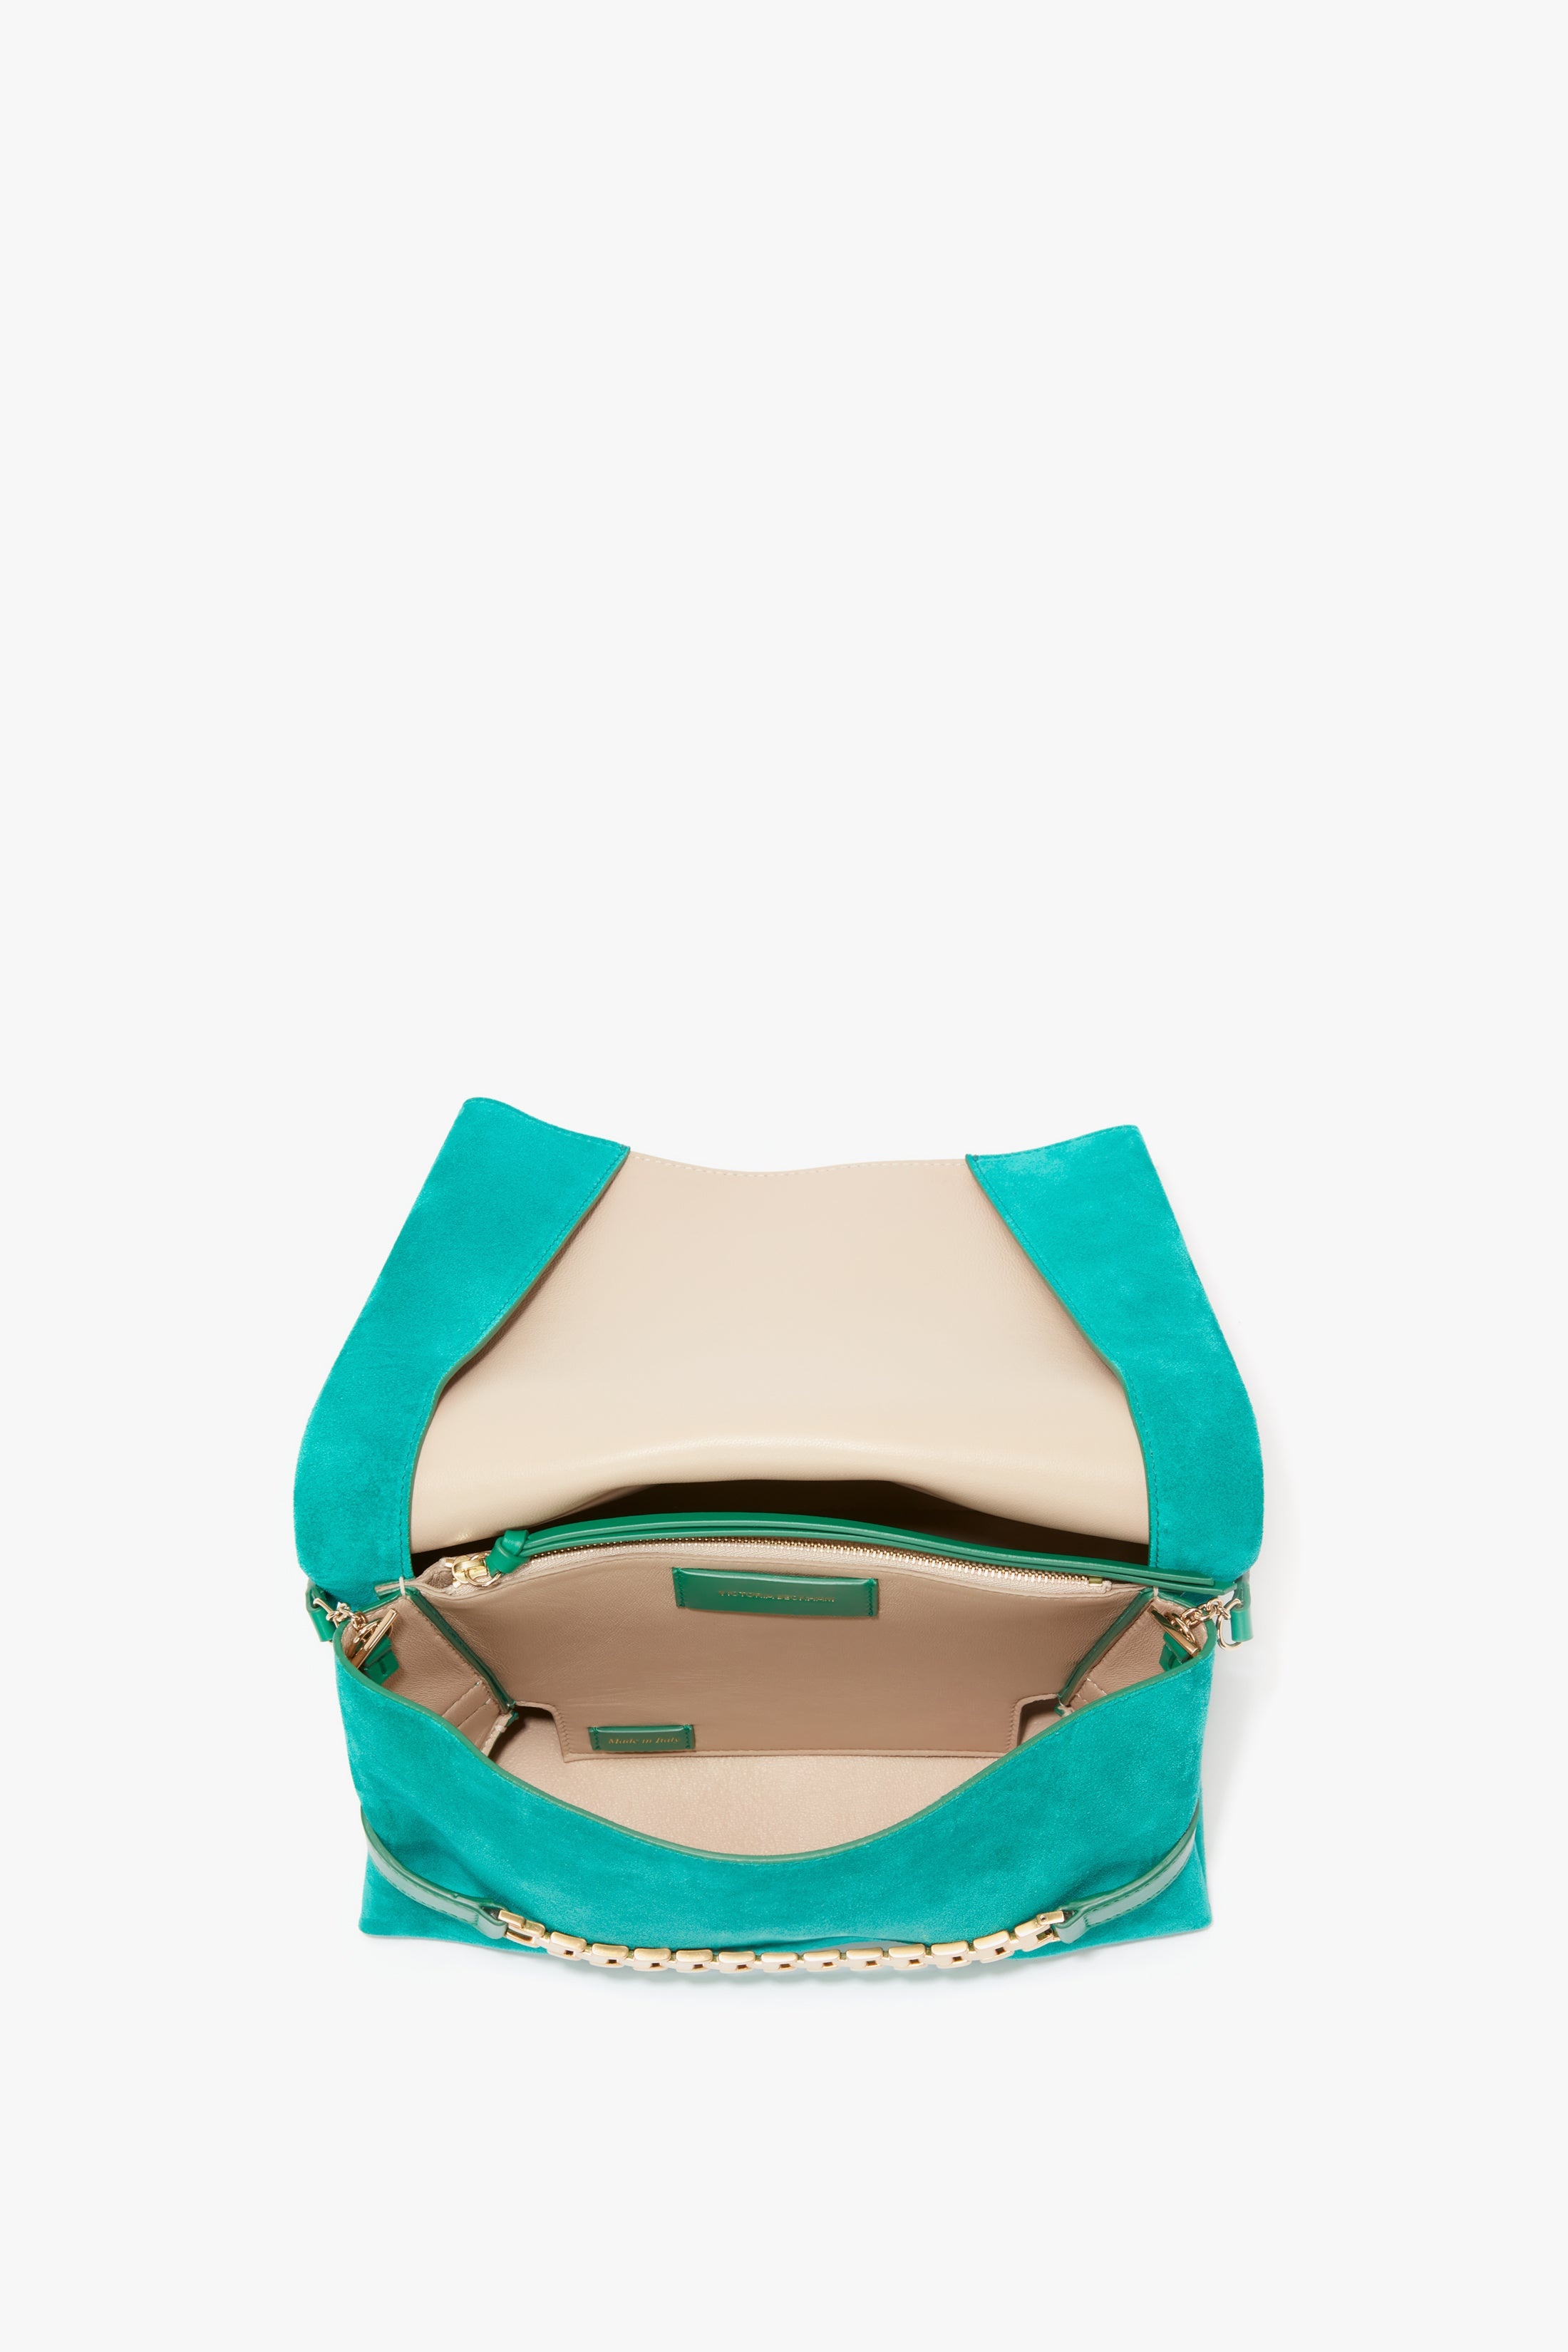 Chain Pouch with Strap in Malachite Suede - 3